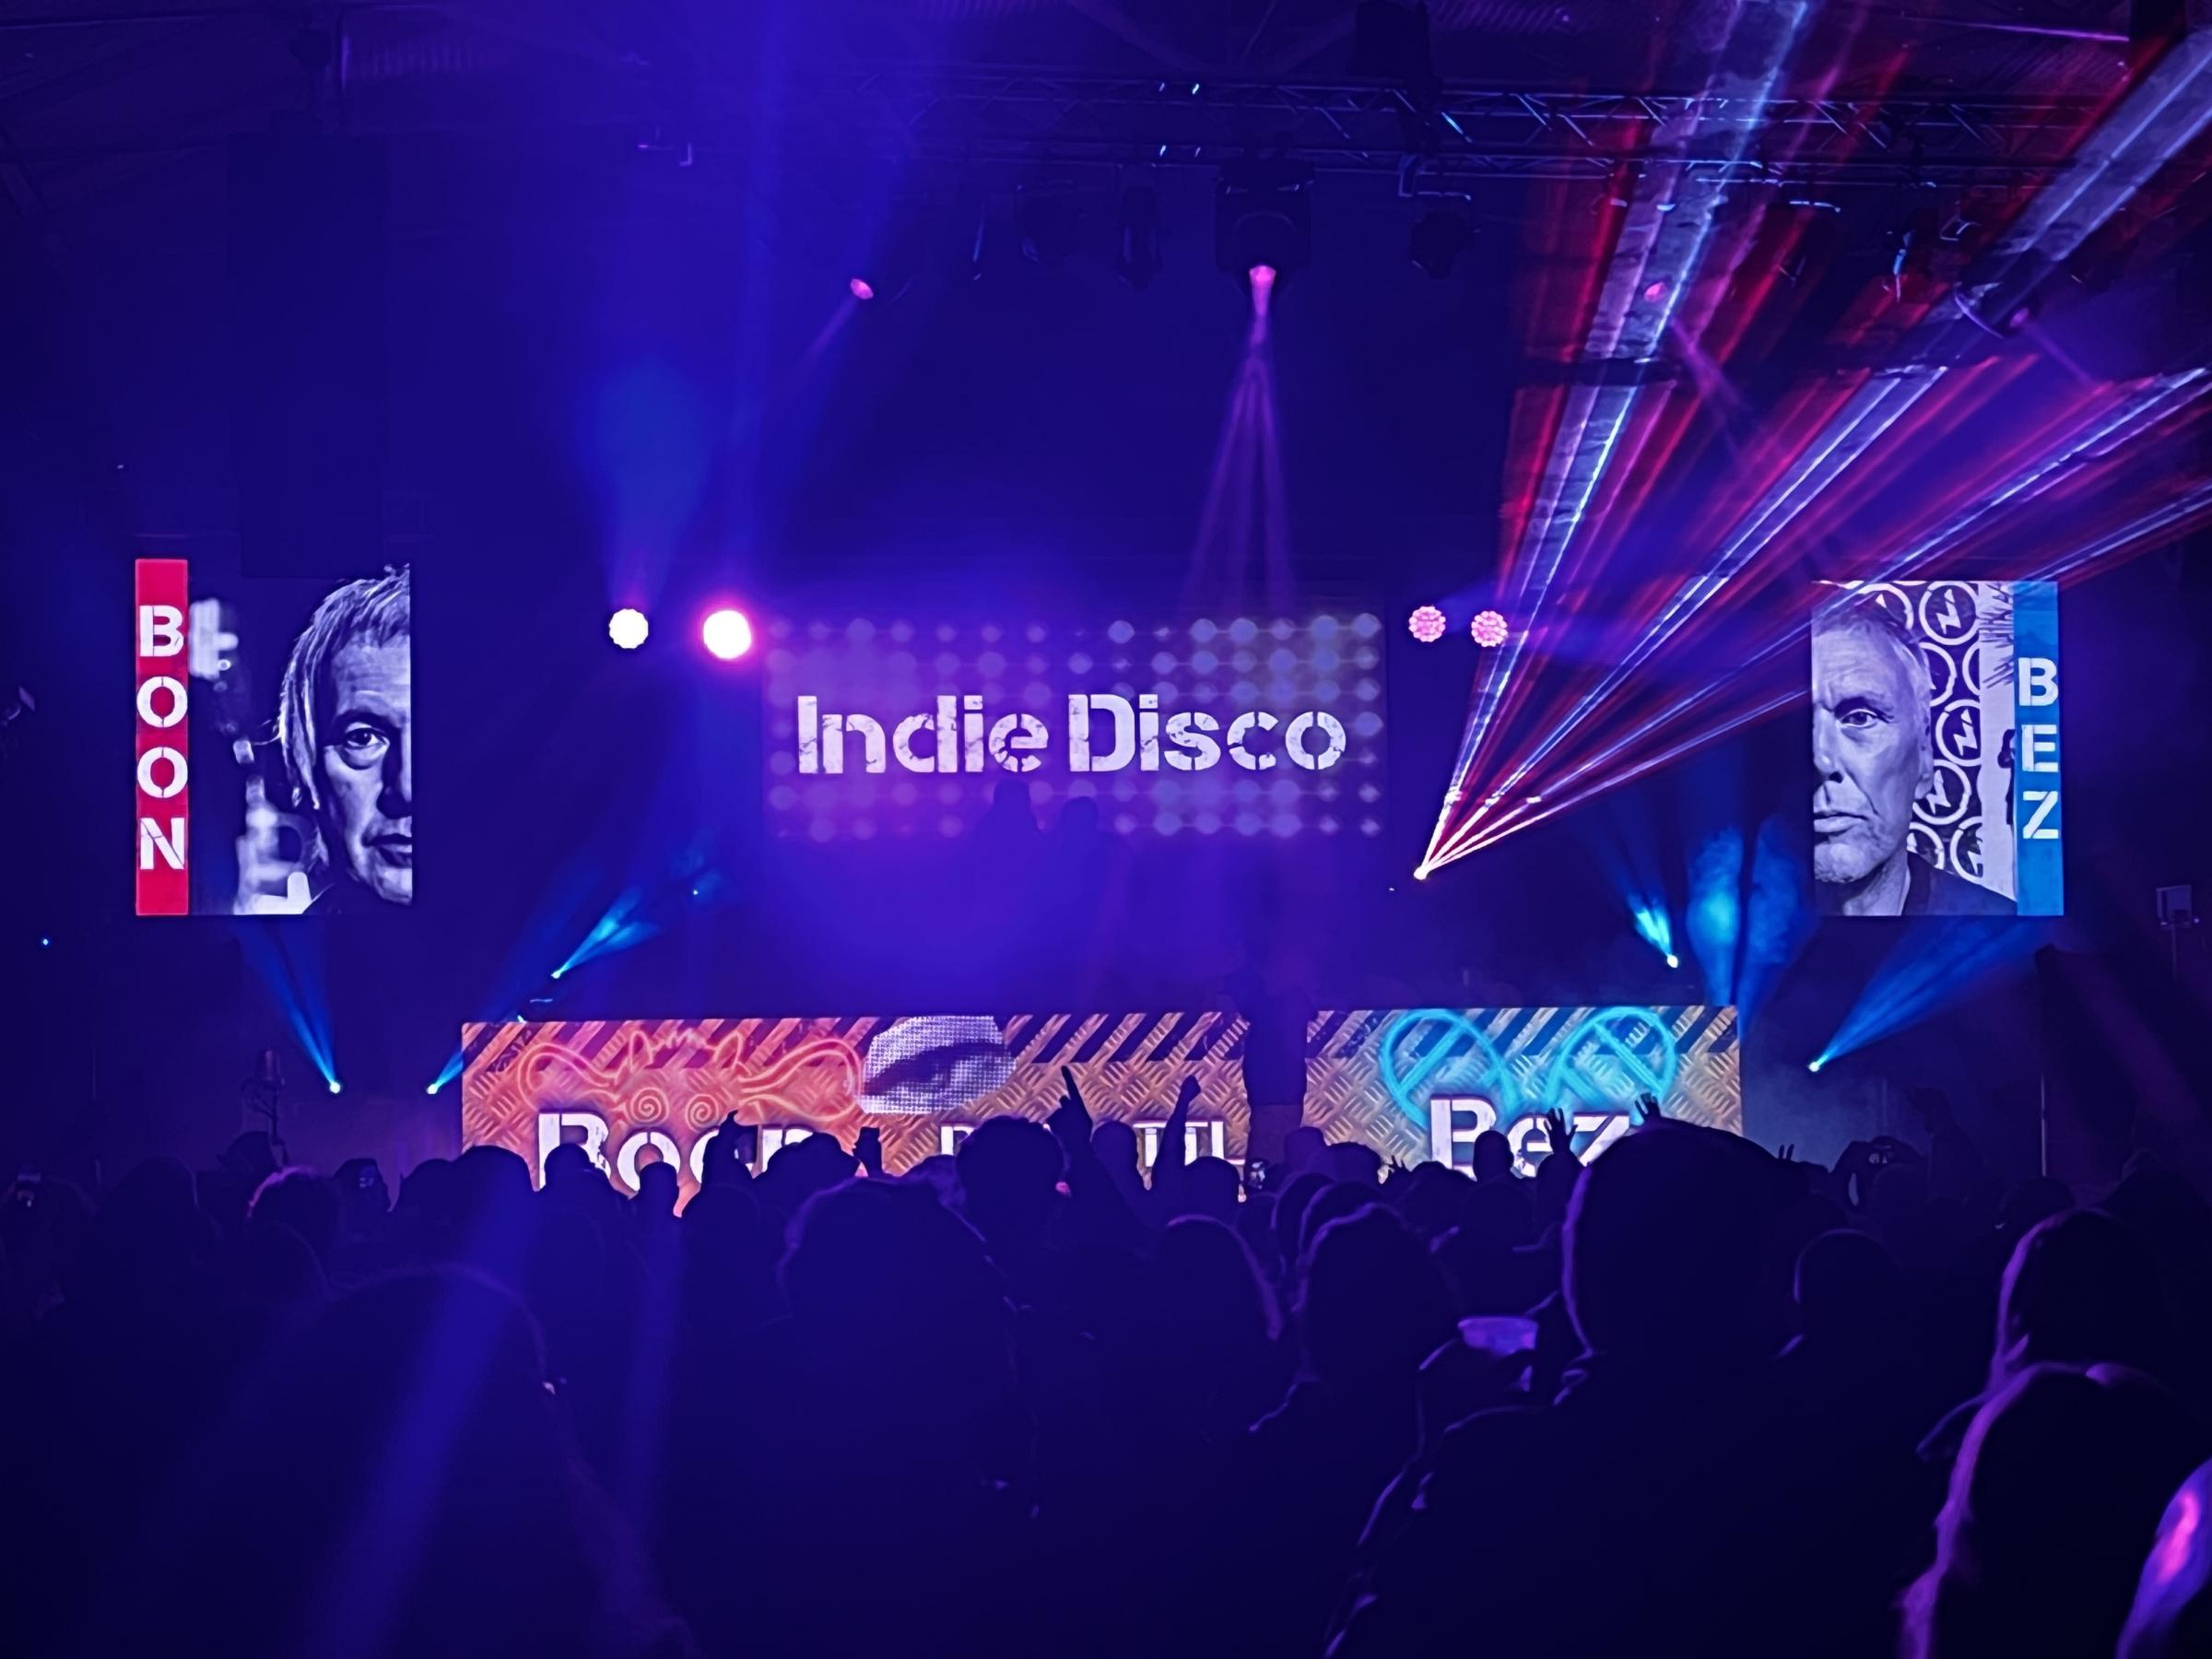 The recent Indie Disco event was also a huge hit